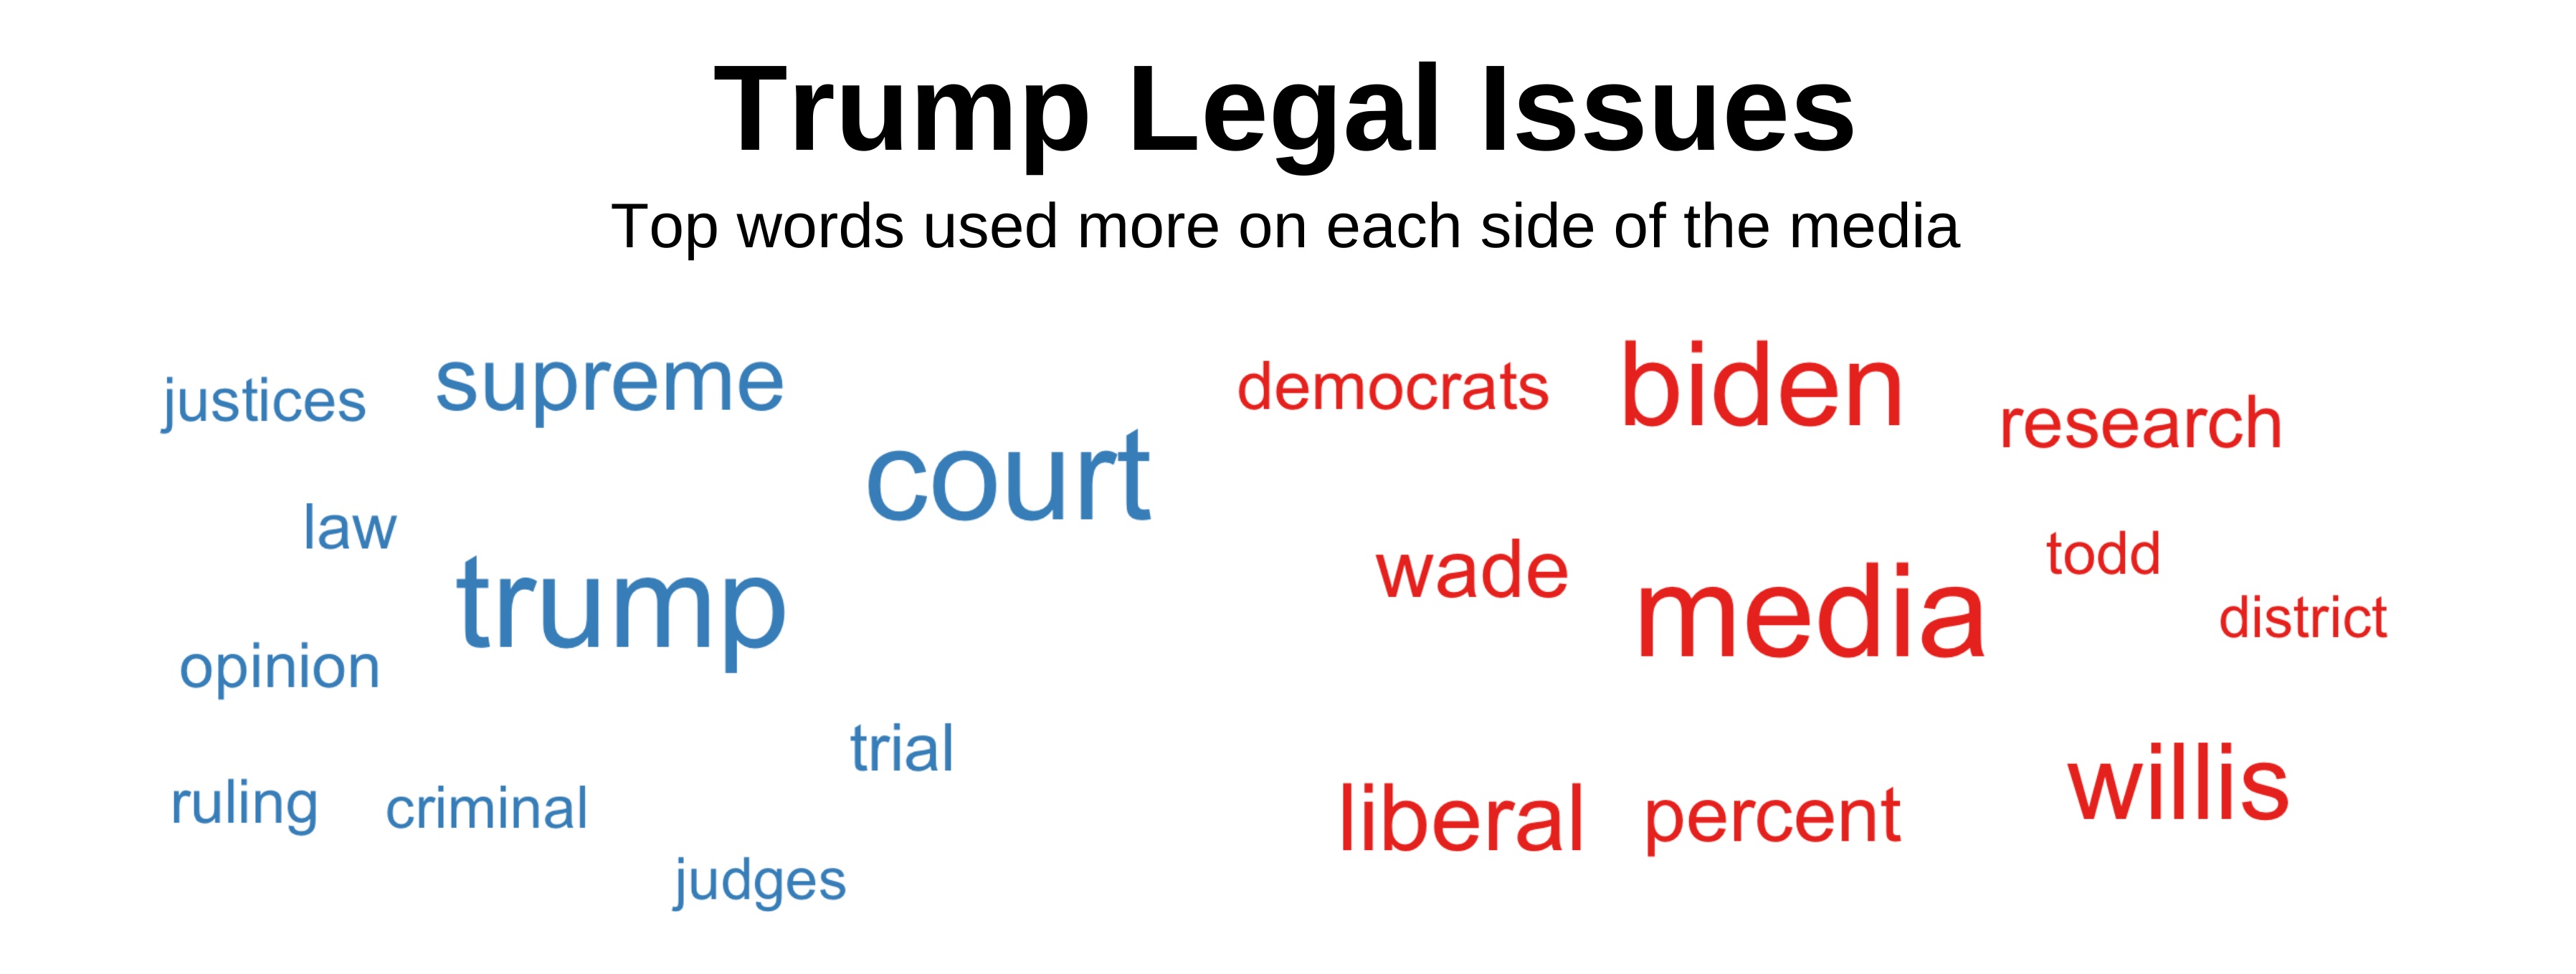 Top words about the Supreme Court and Donald Trump used more on each side of the media.